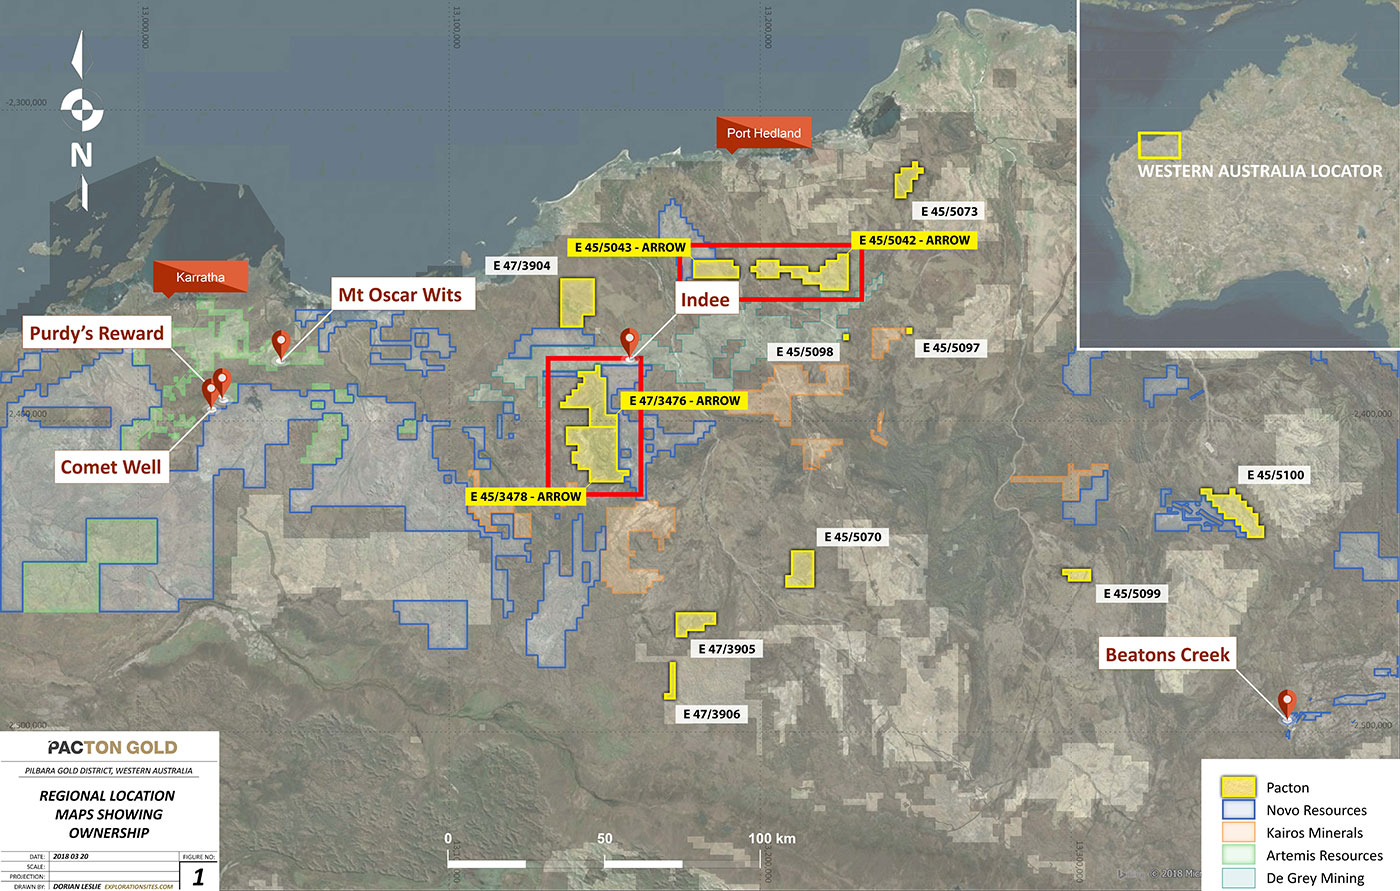 The Pilbara region has long been the world’s most prolific iron ore production district. Now, gold in Archean age conglomerates is the main exploration focus, heralded by Novo Resources dramatic new discoveries.